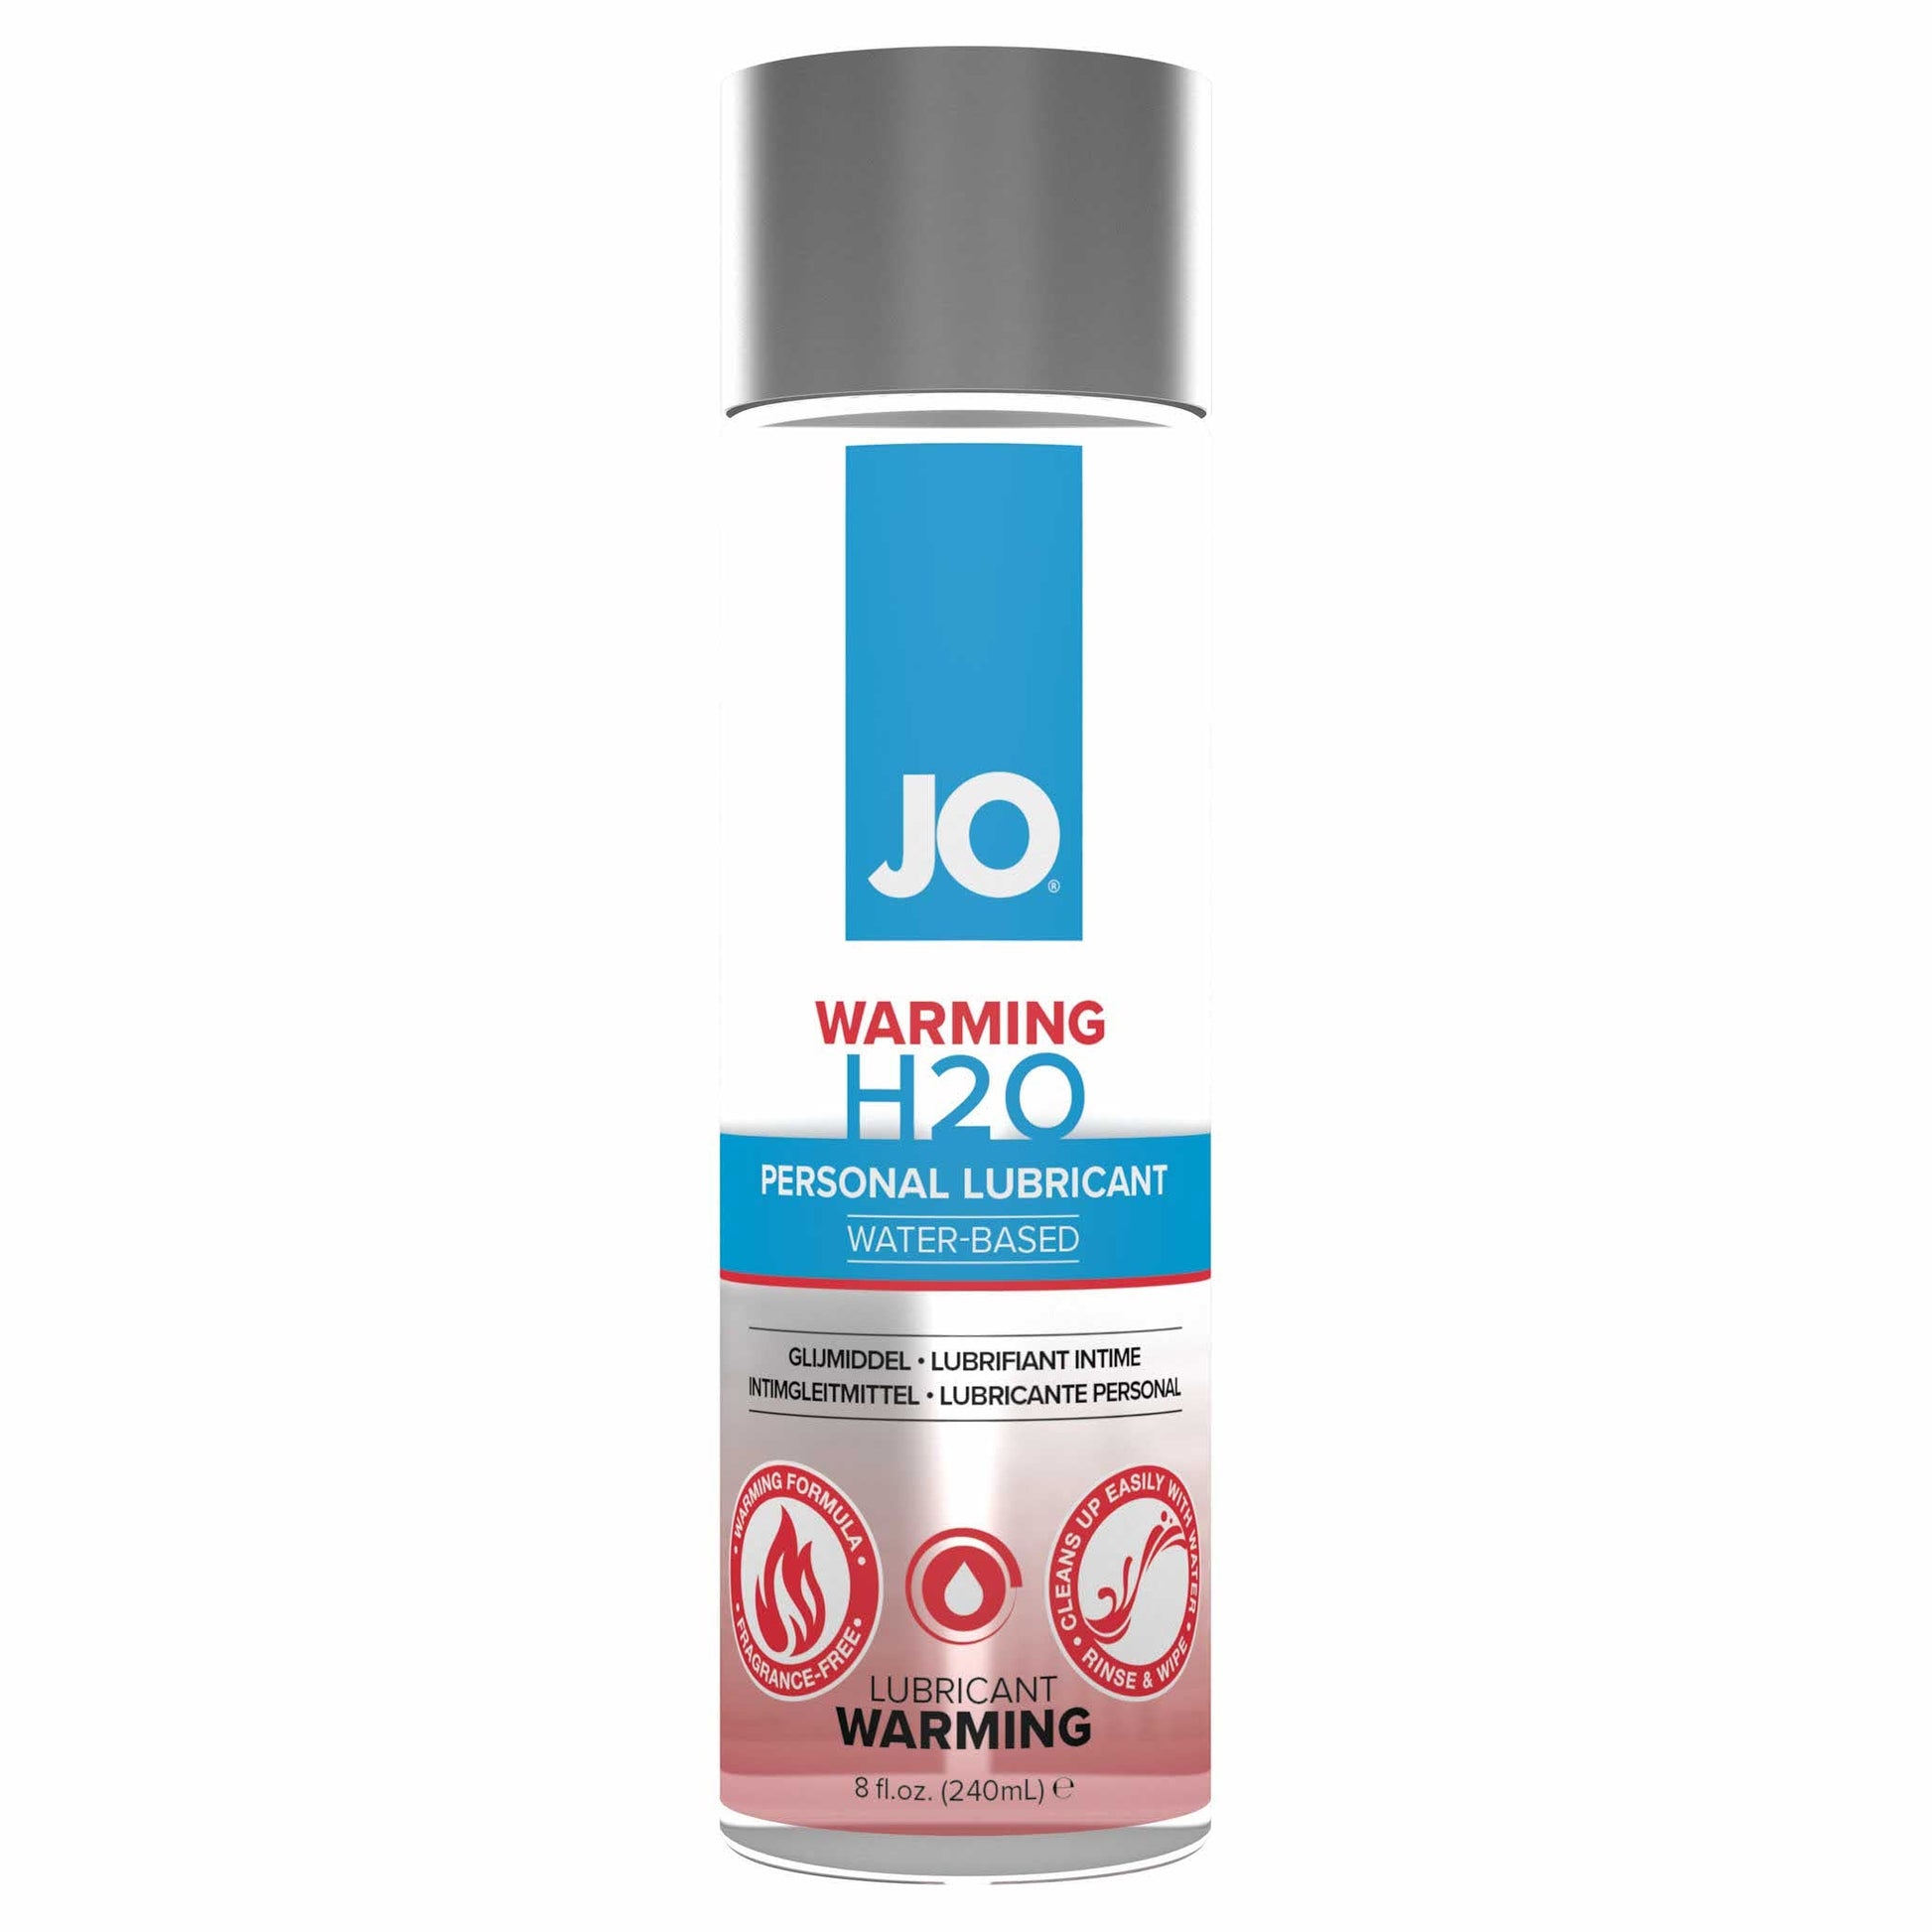 front view of the jo h2o classic personal water-based lubricant warming 8oz